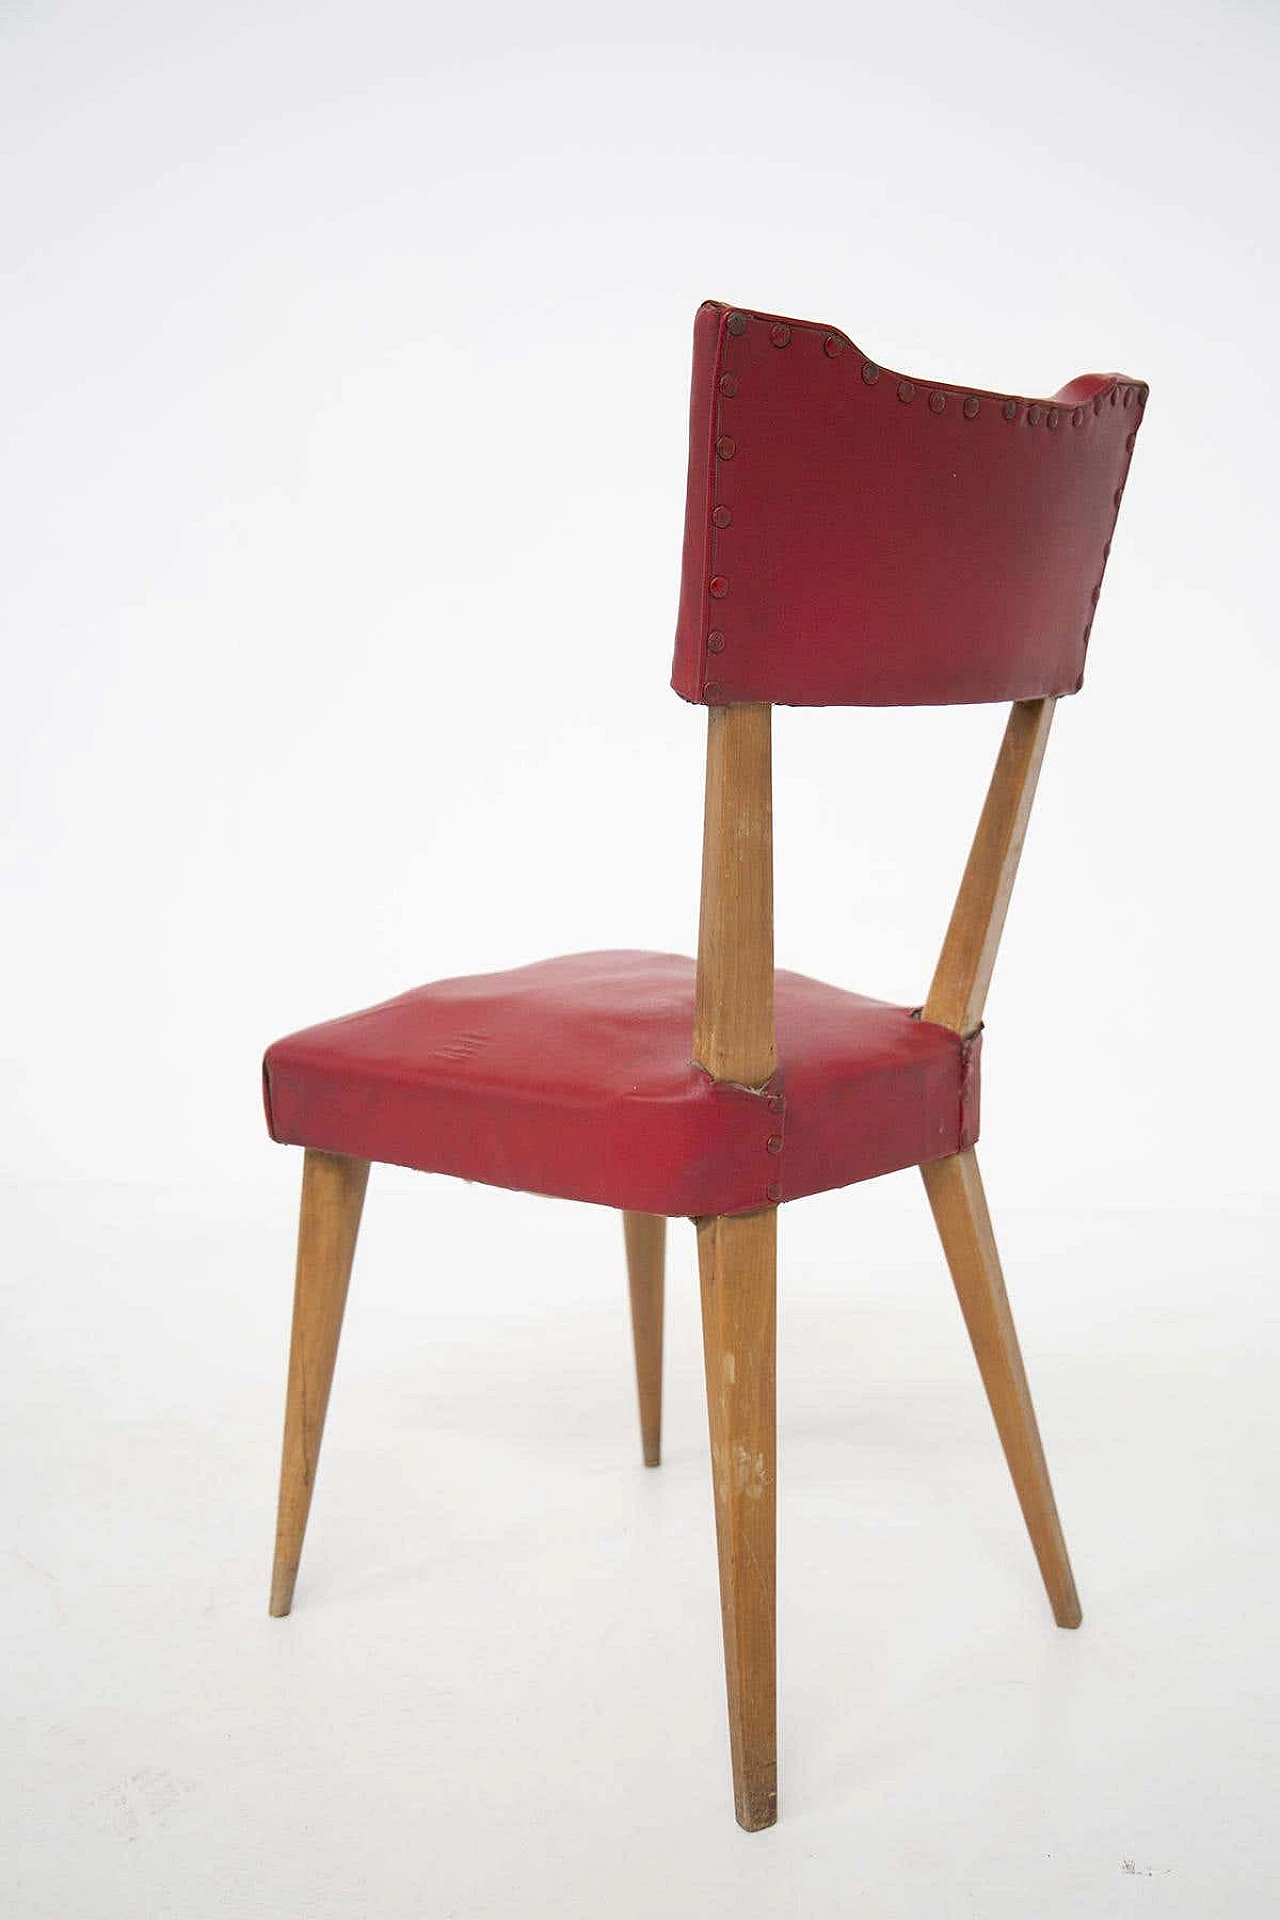 4 Wooden chairs upholstered in red skai, 1950s 1